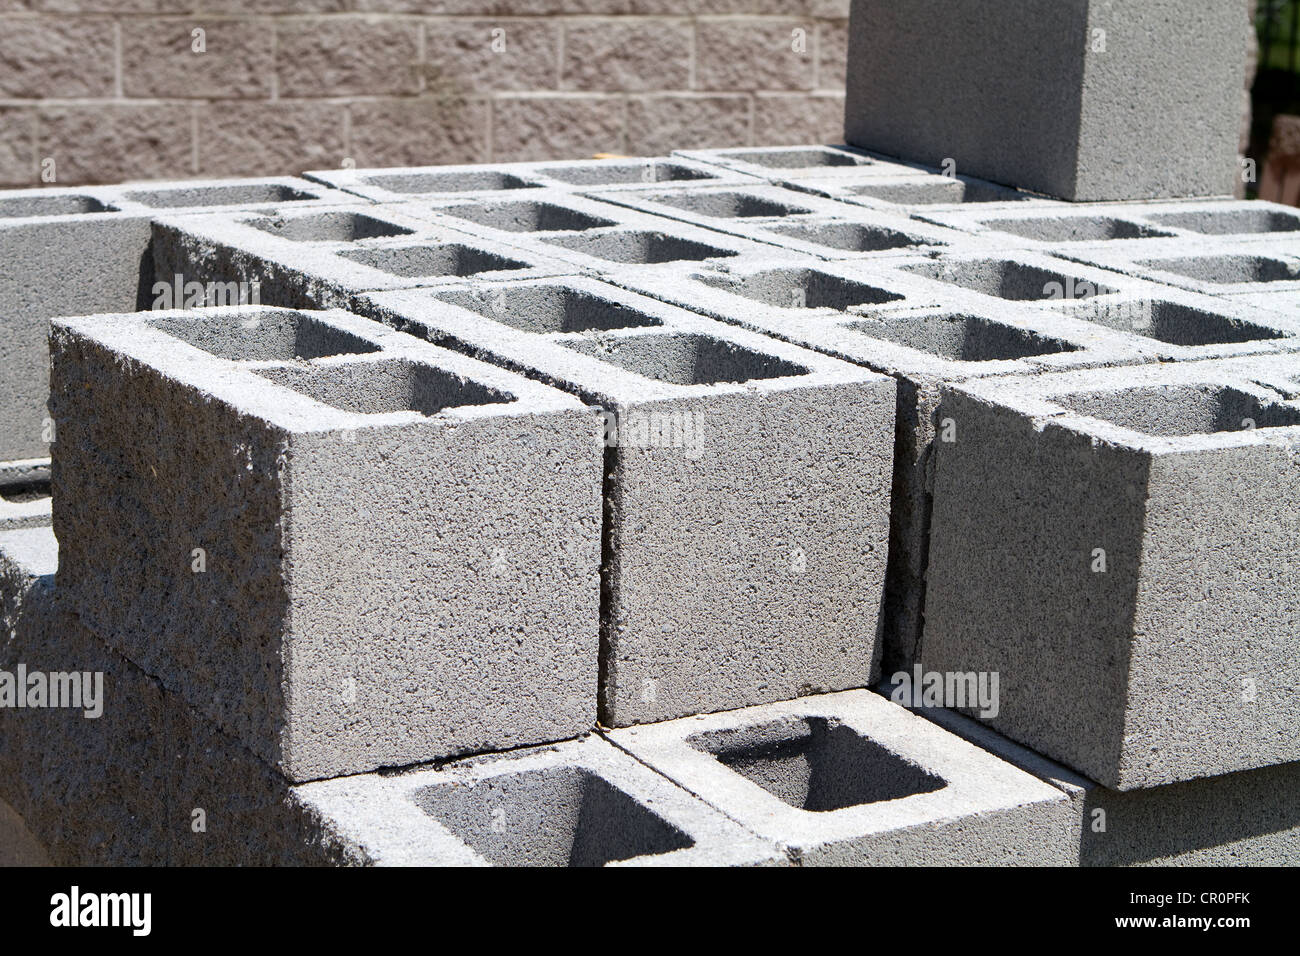 Architectural concrete blocks stacked at a construction site Stock